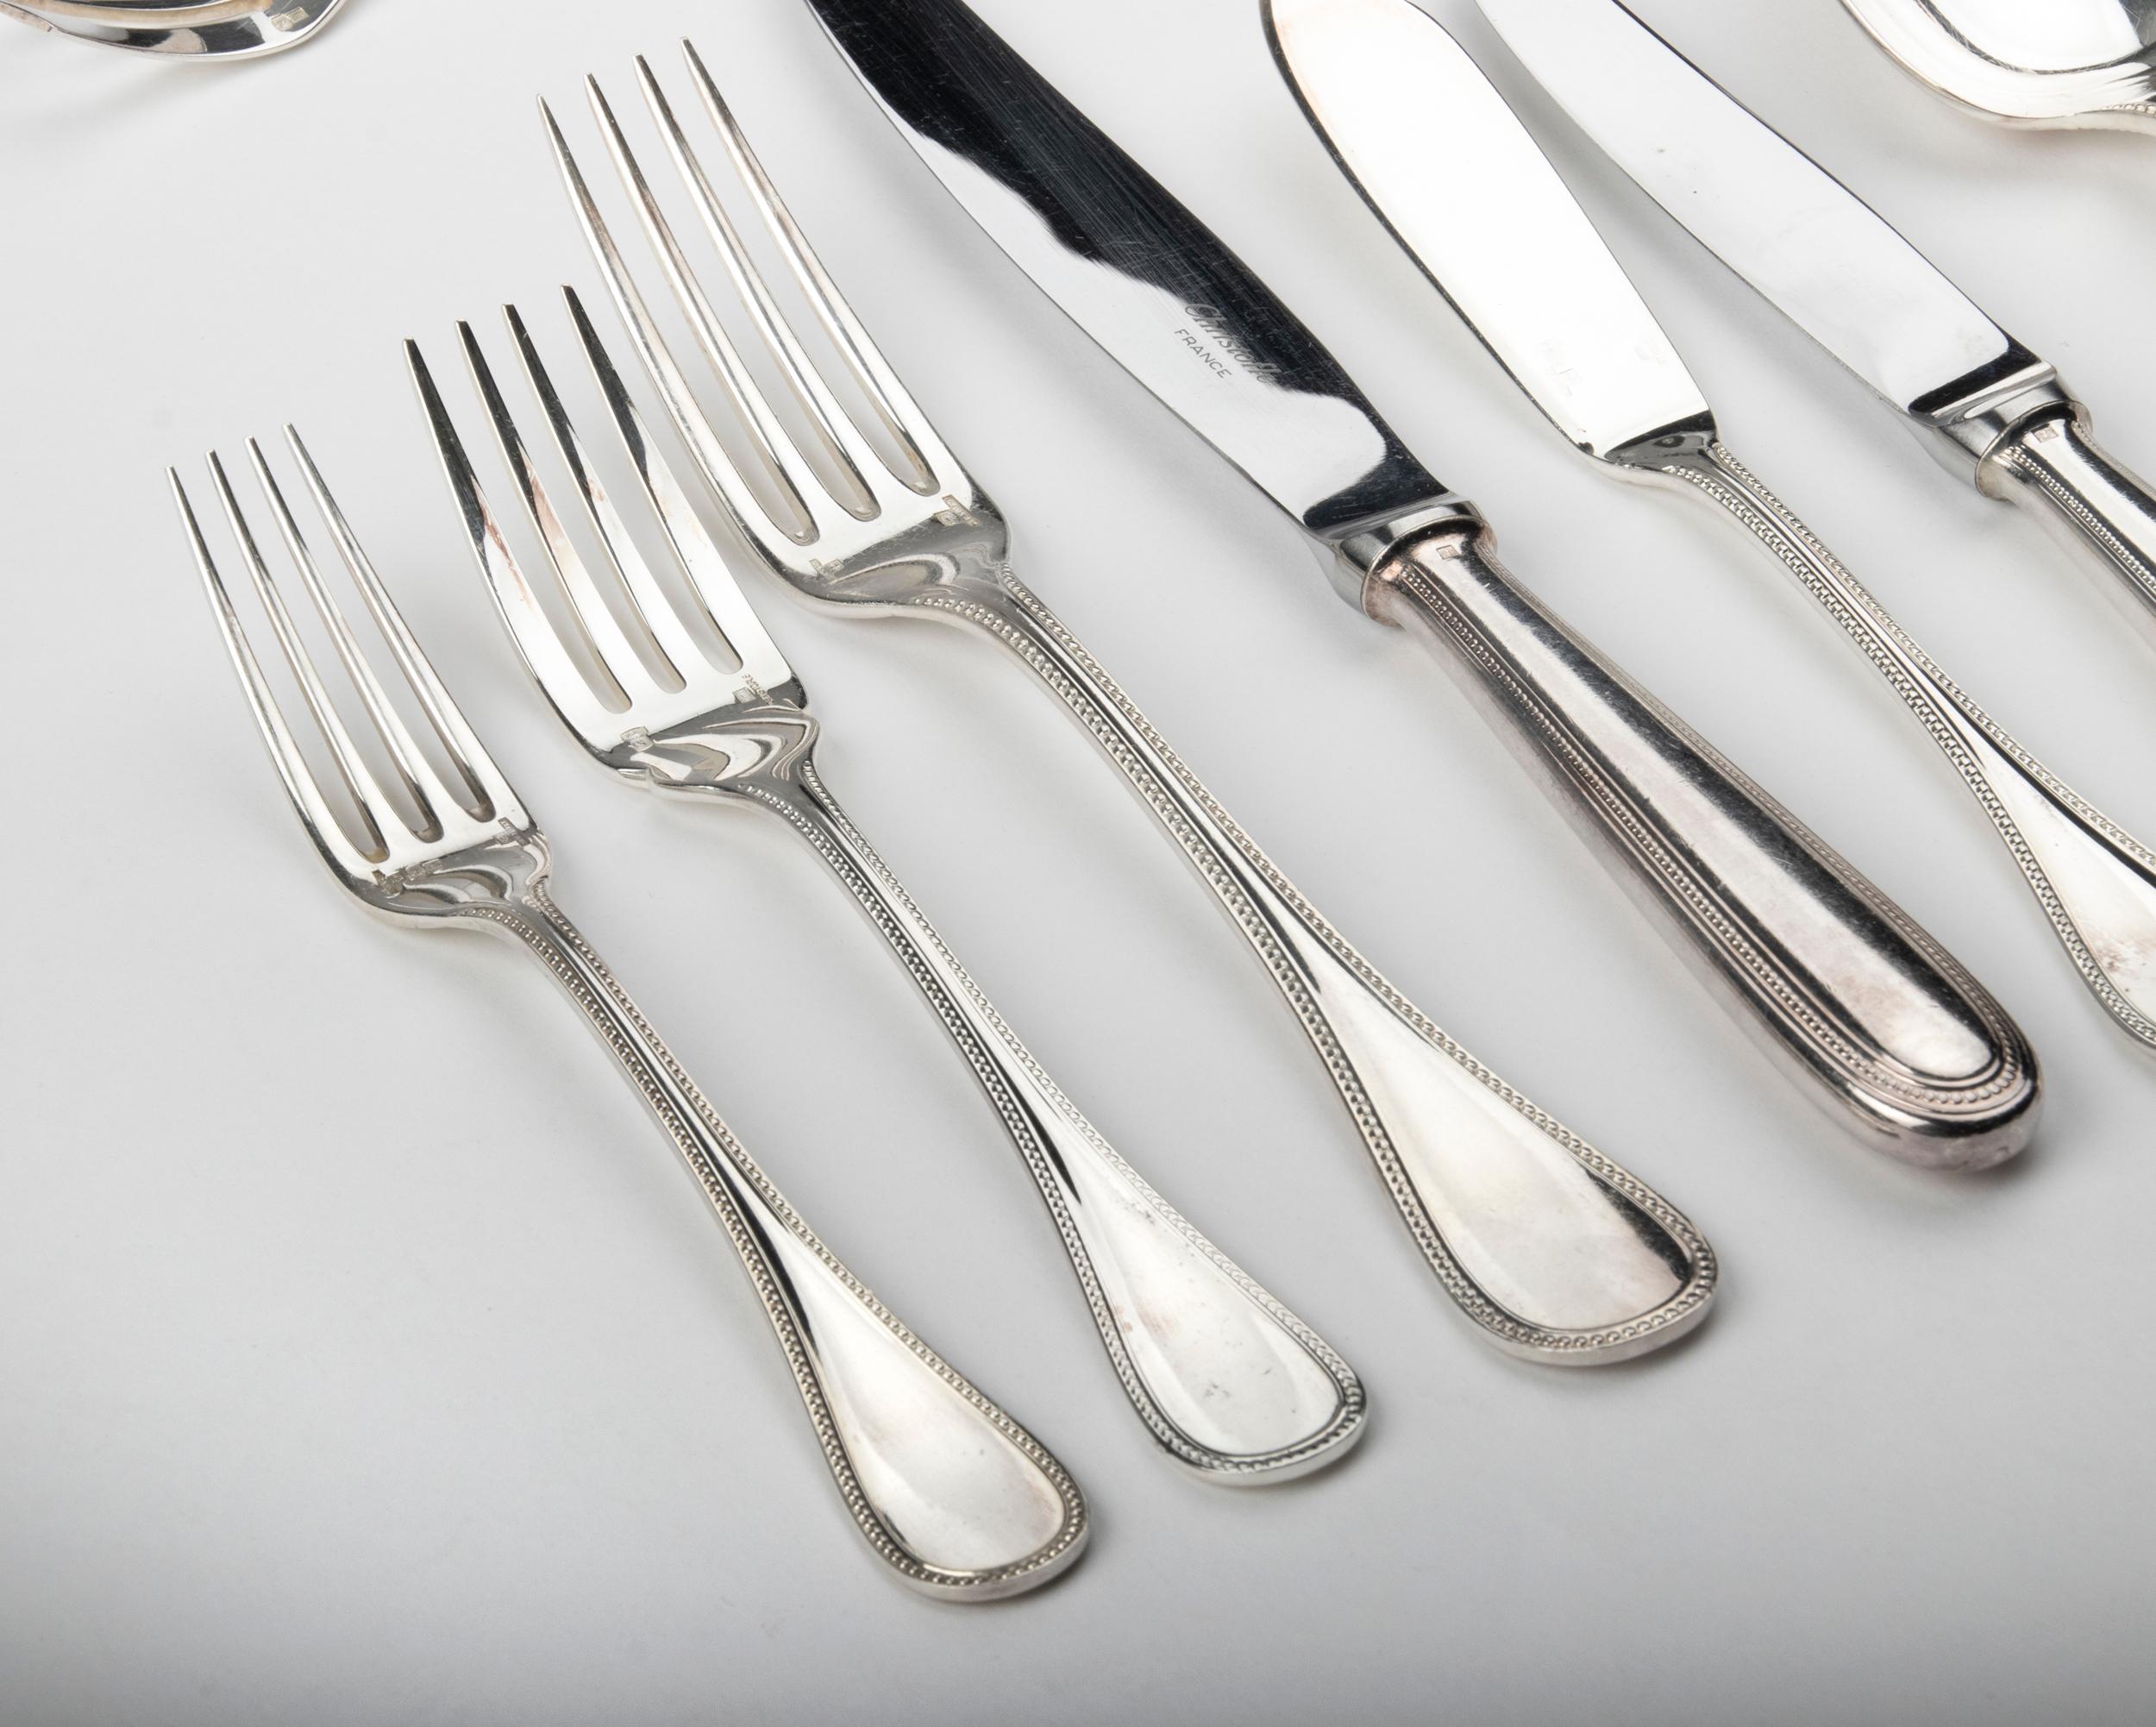 146-Piece Silver-Plated Christofle Flatware, Perles 2